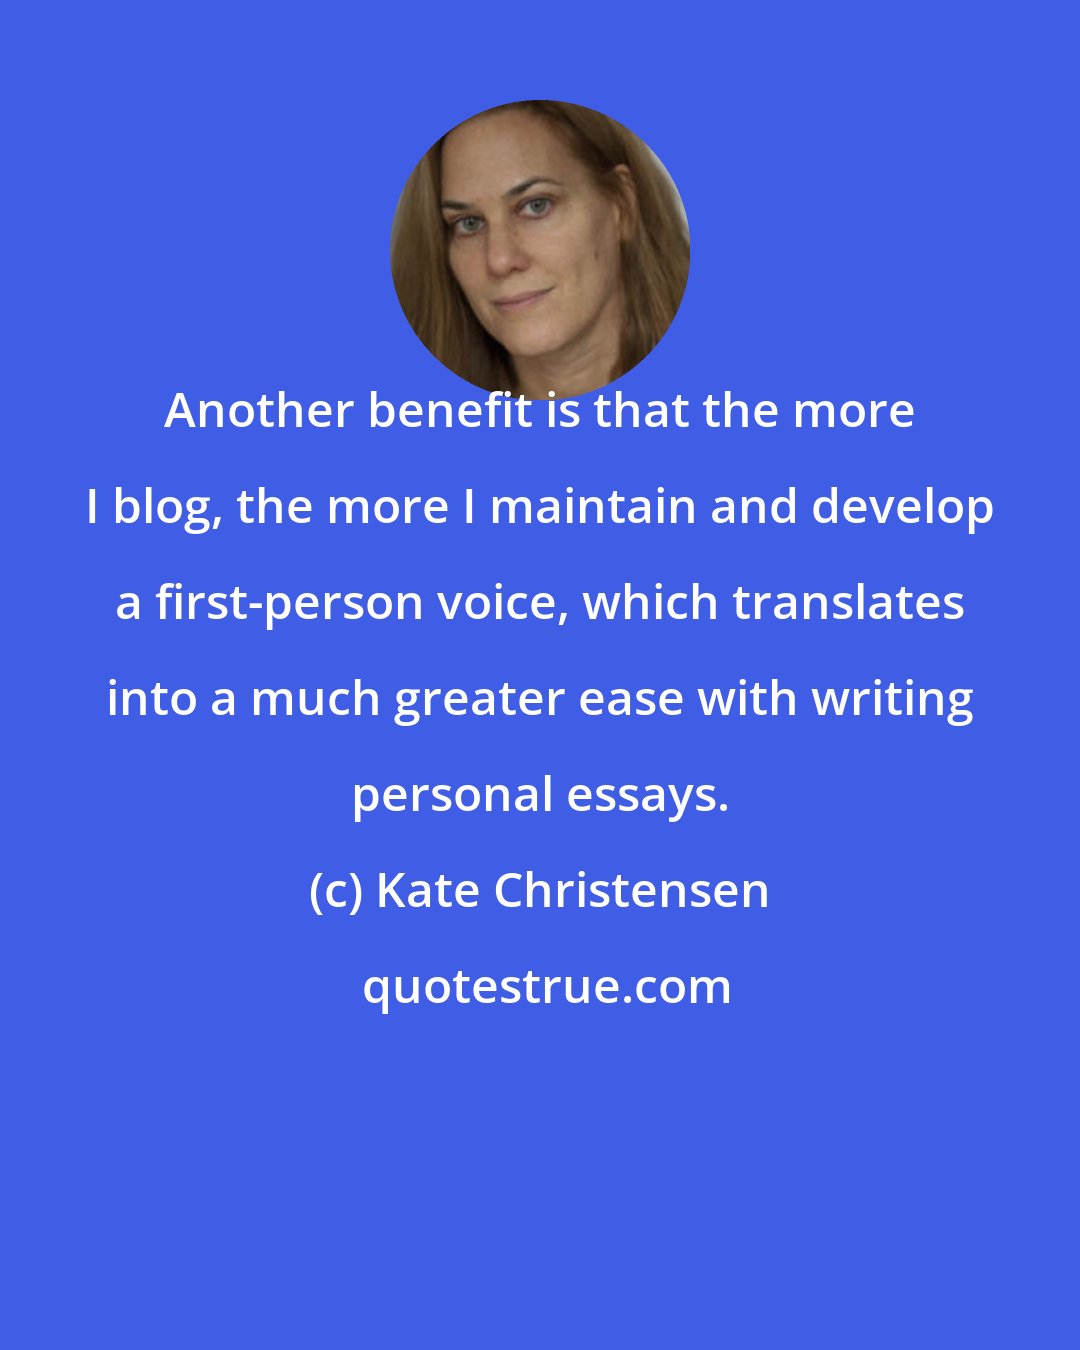 Kate Christensen: Another benefit is that the more I blog, the more I maintain and develop a first-person voice, which translates into a much greater ease with writing personal essays.